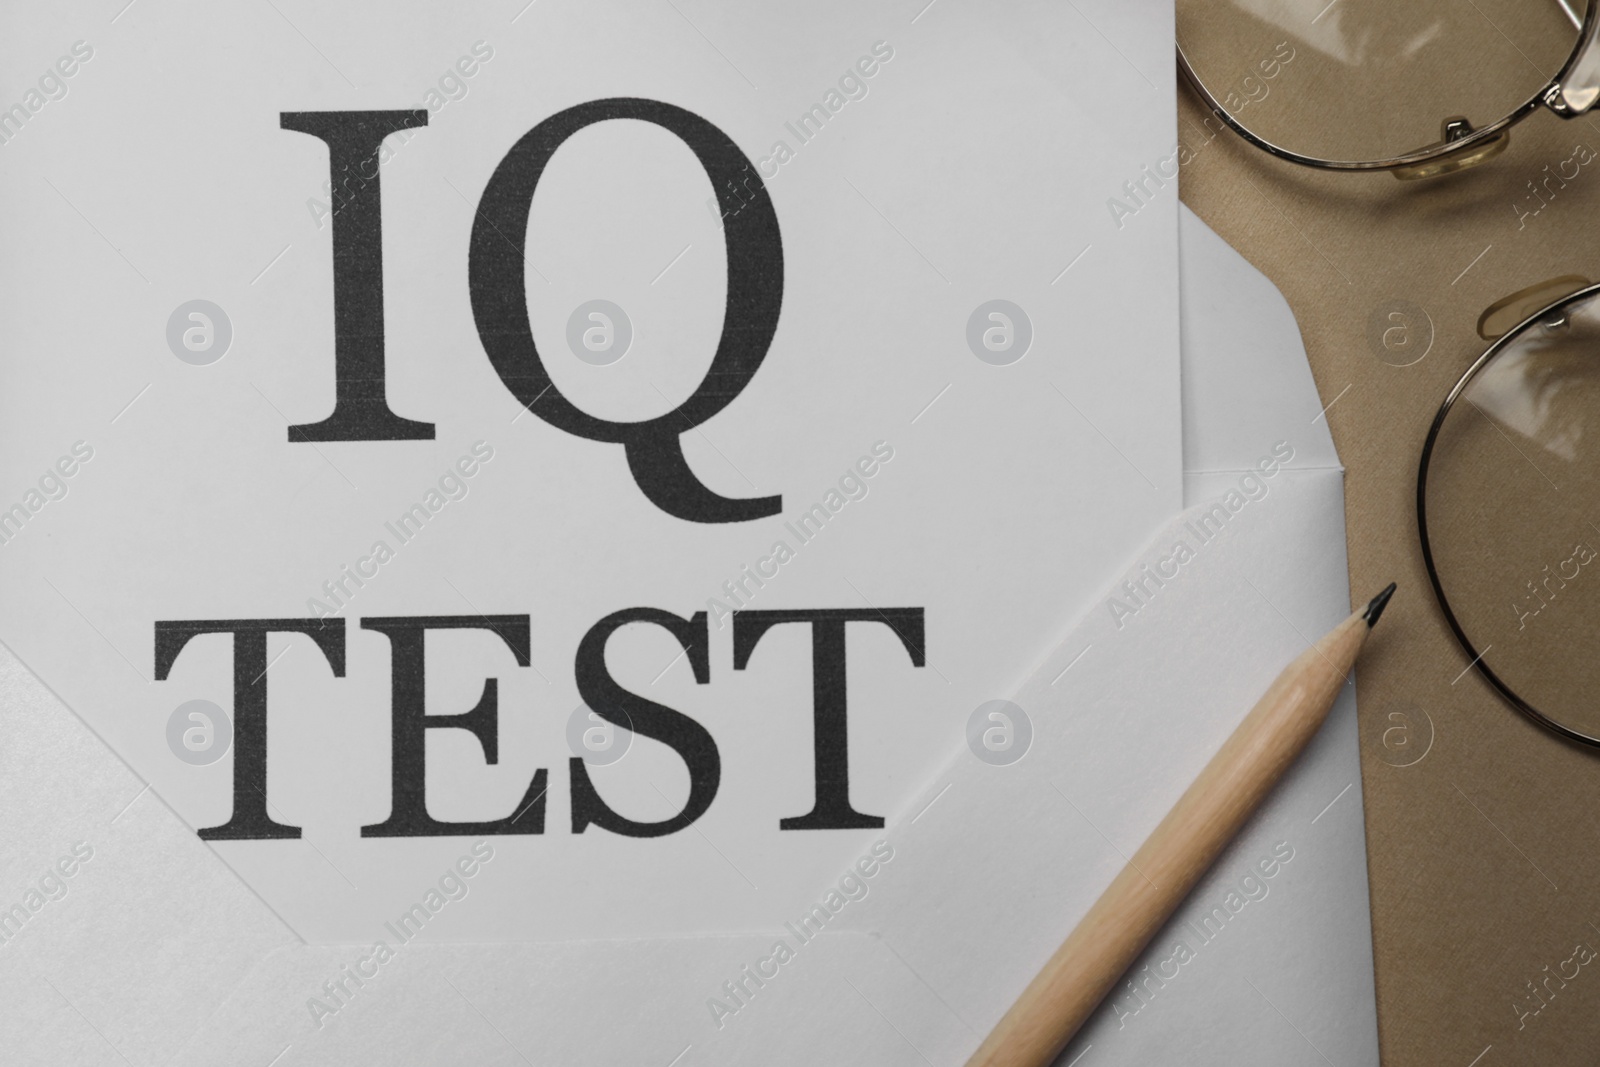 Photo of Paper with words IQ Test in envelope and pencil on notebook, flat lay